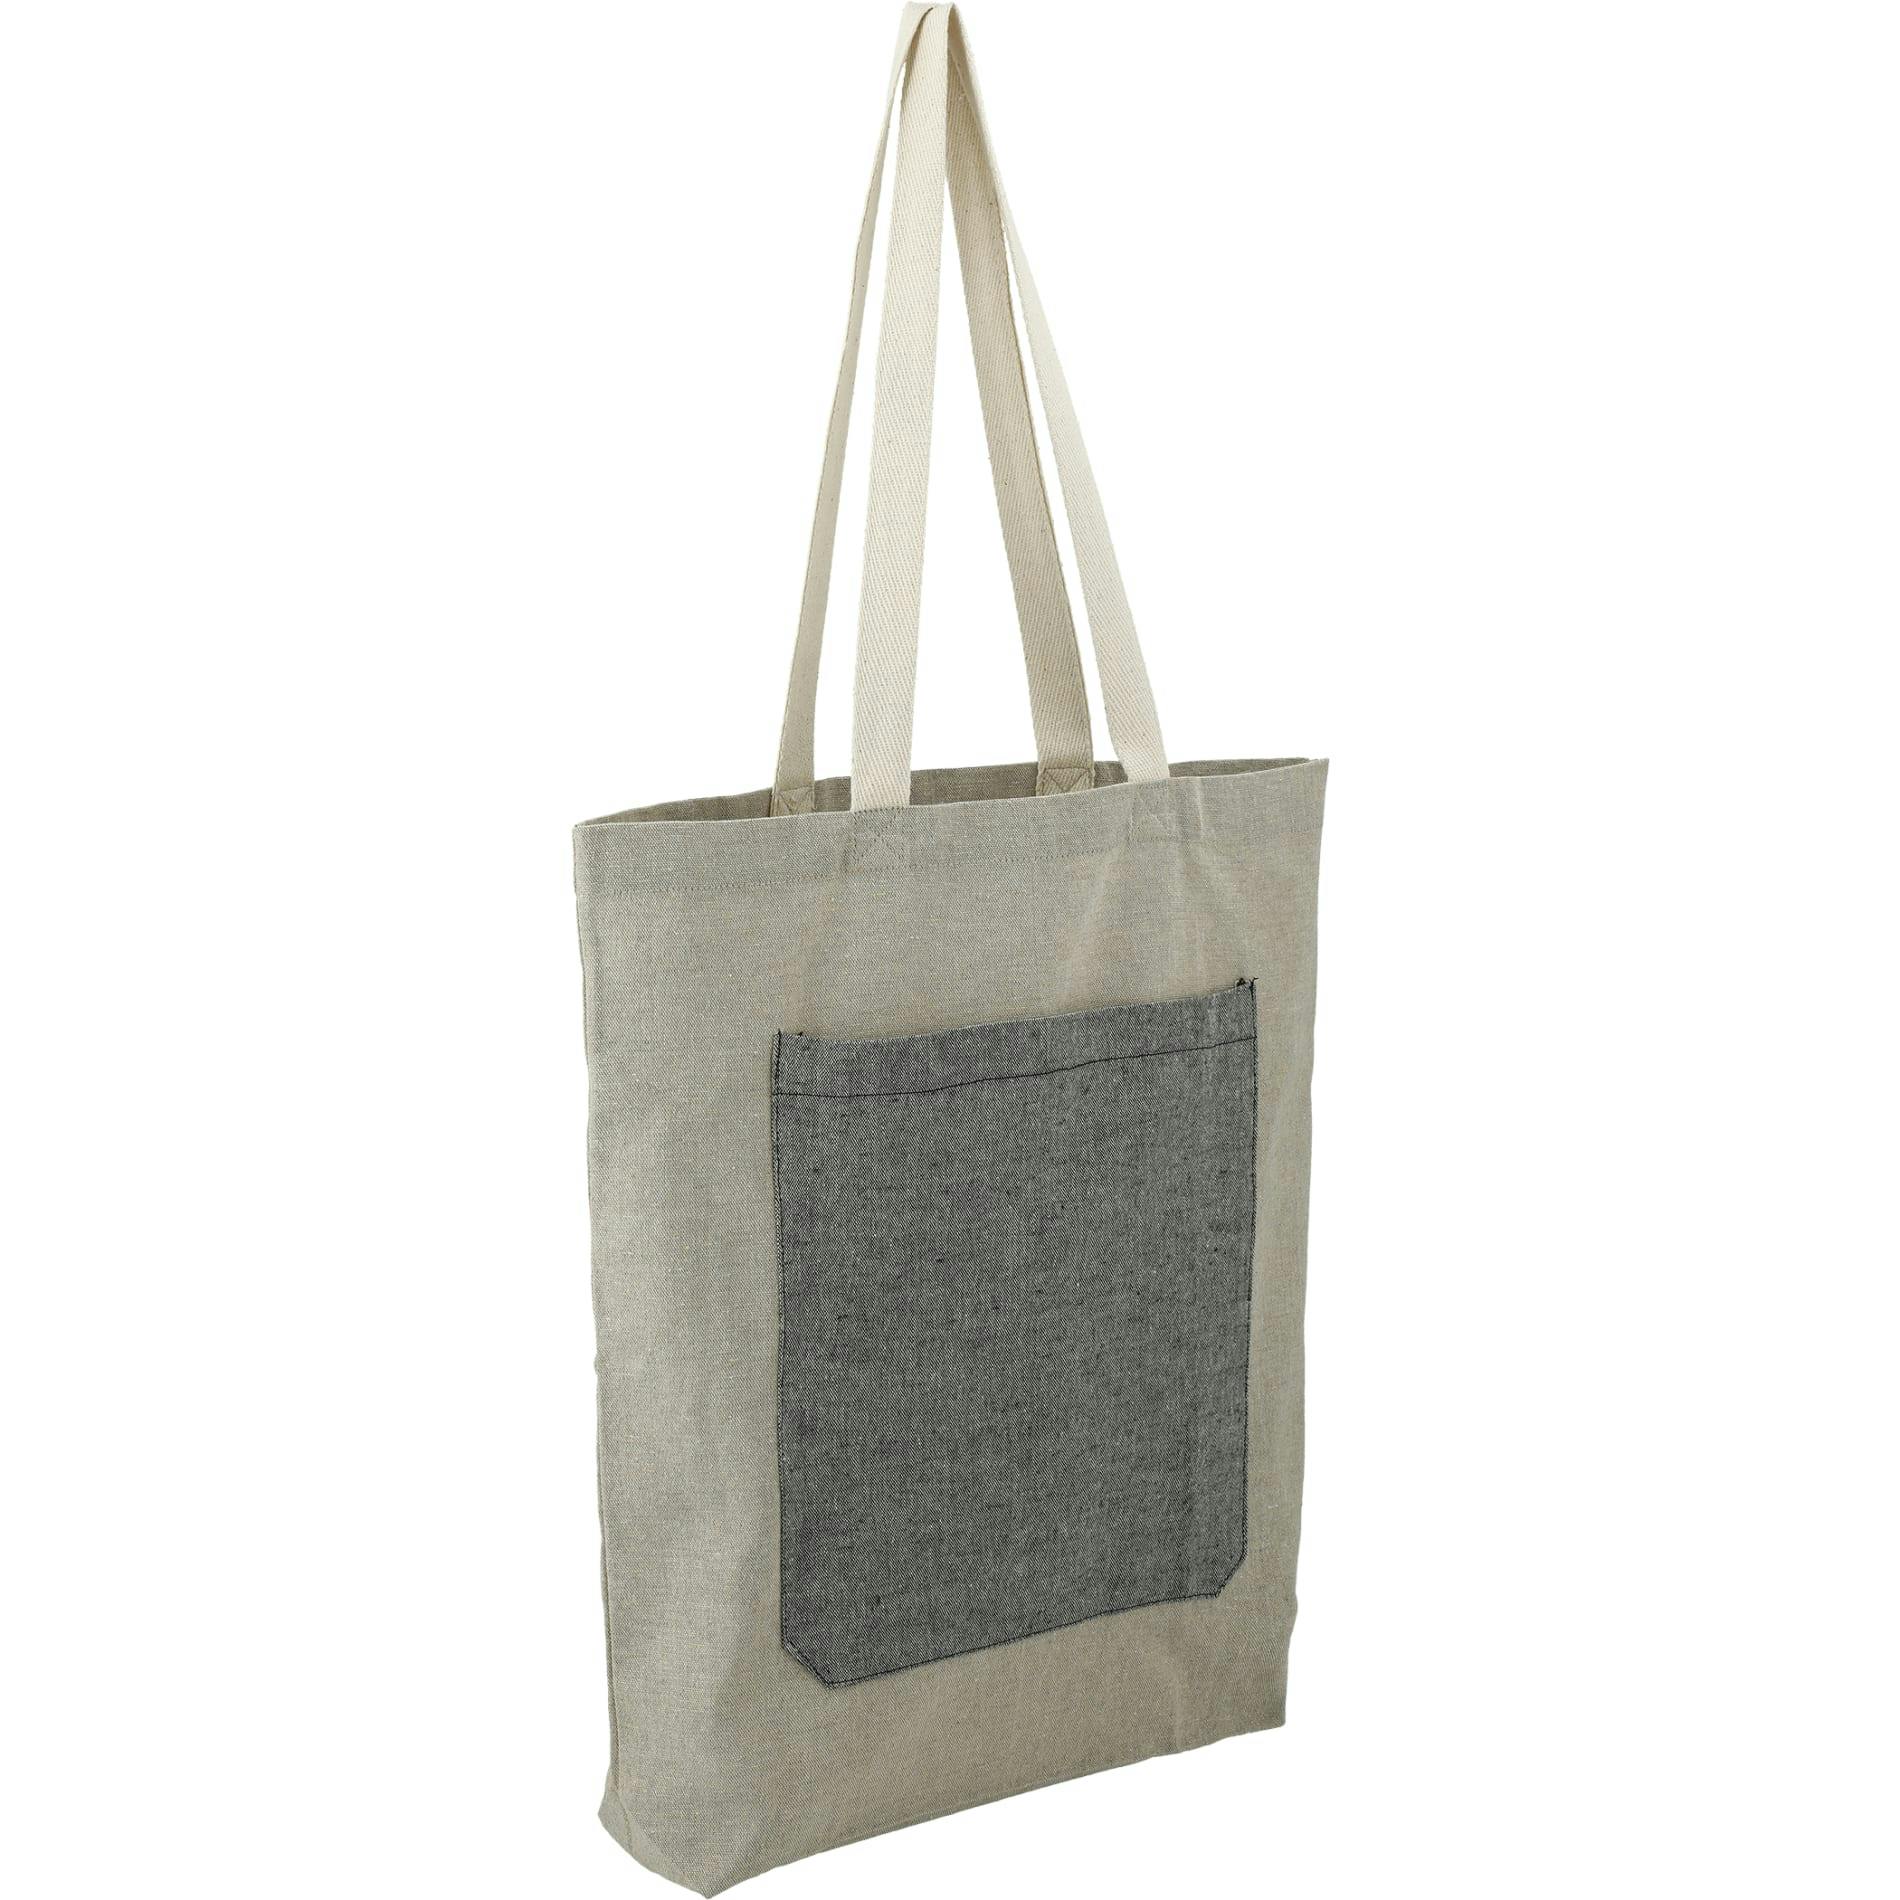 Recycled Cotton Pocket Tote - additional Image 1